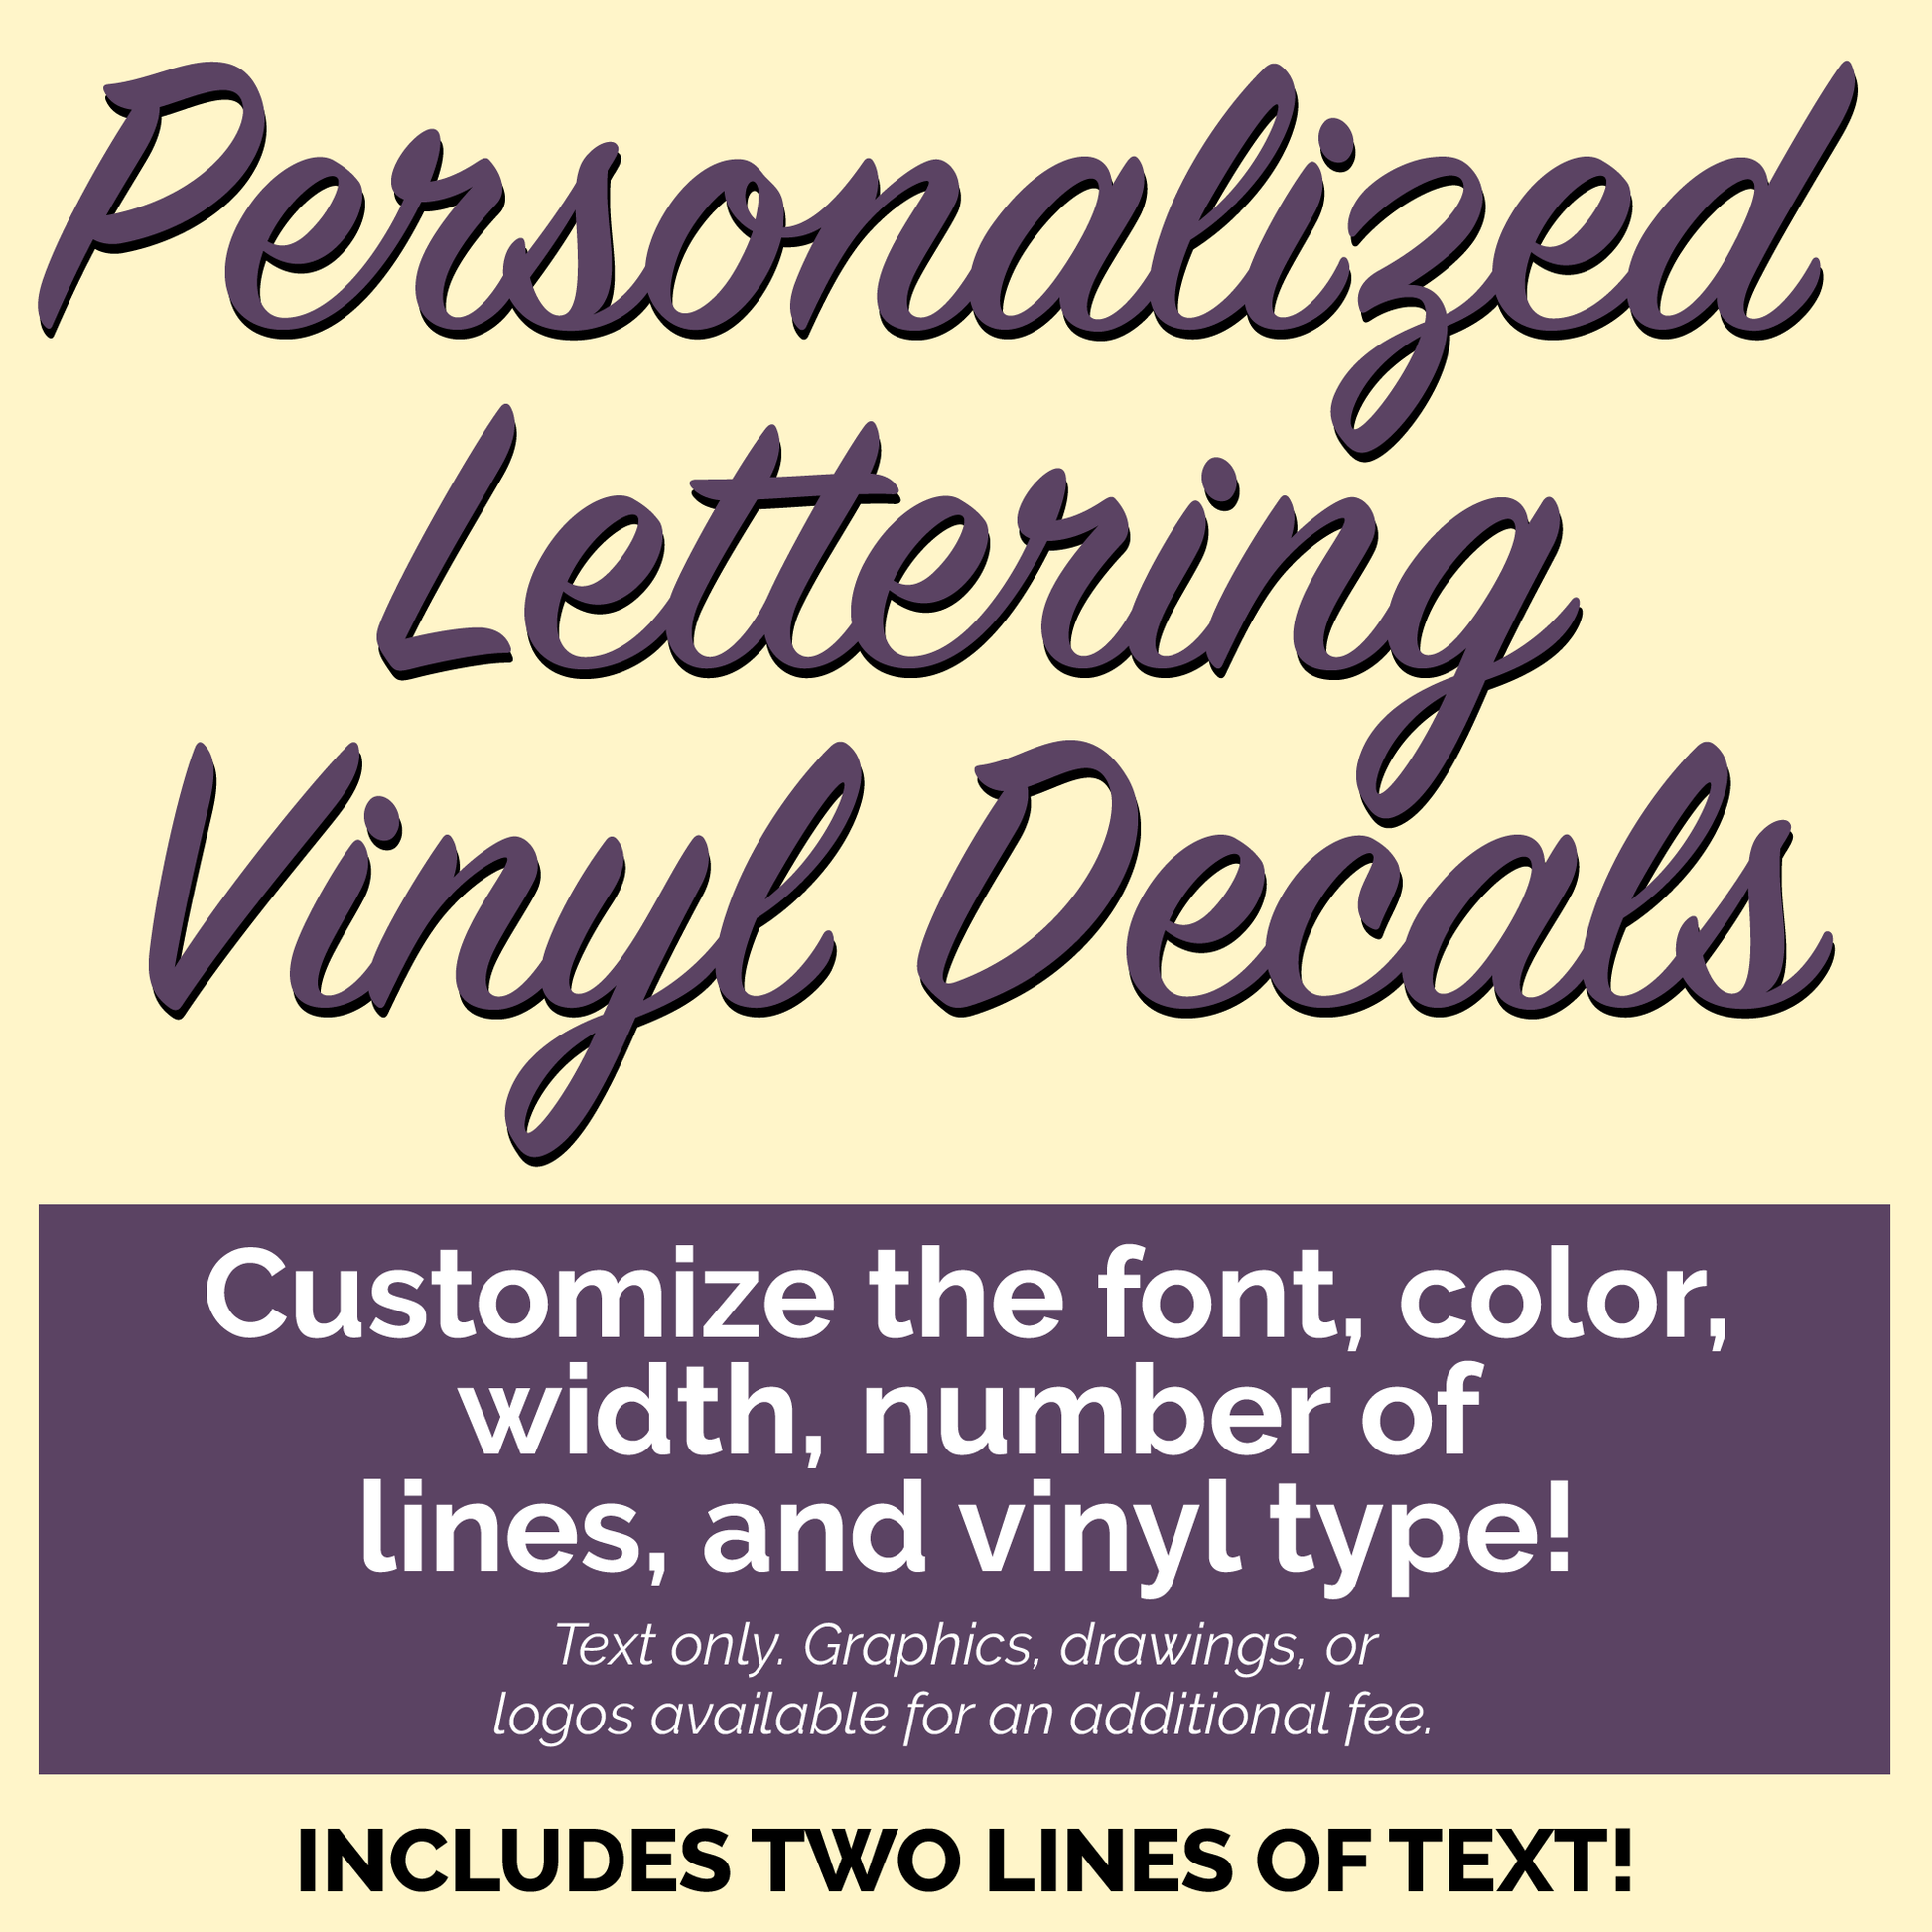 Personalized Lettering Vinyl Decals